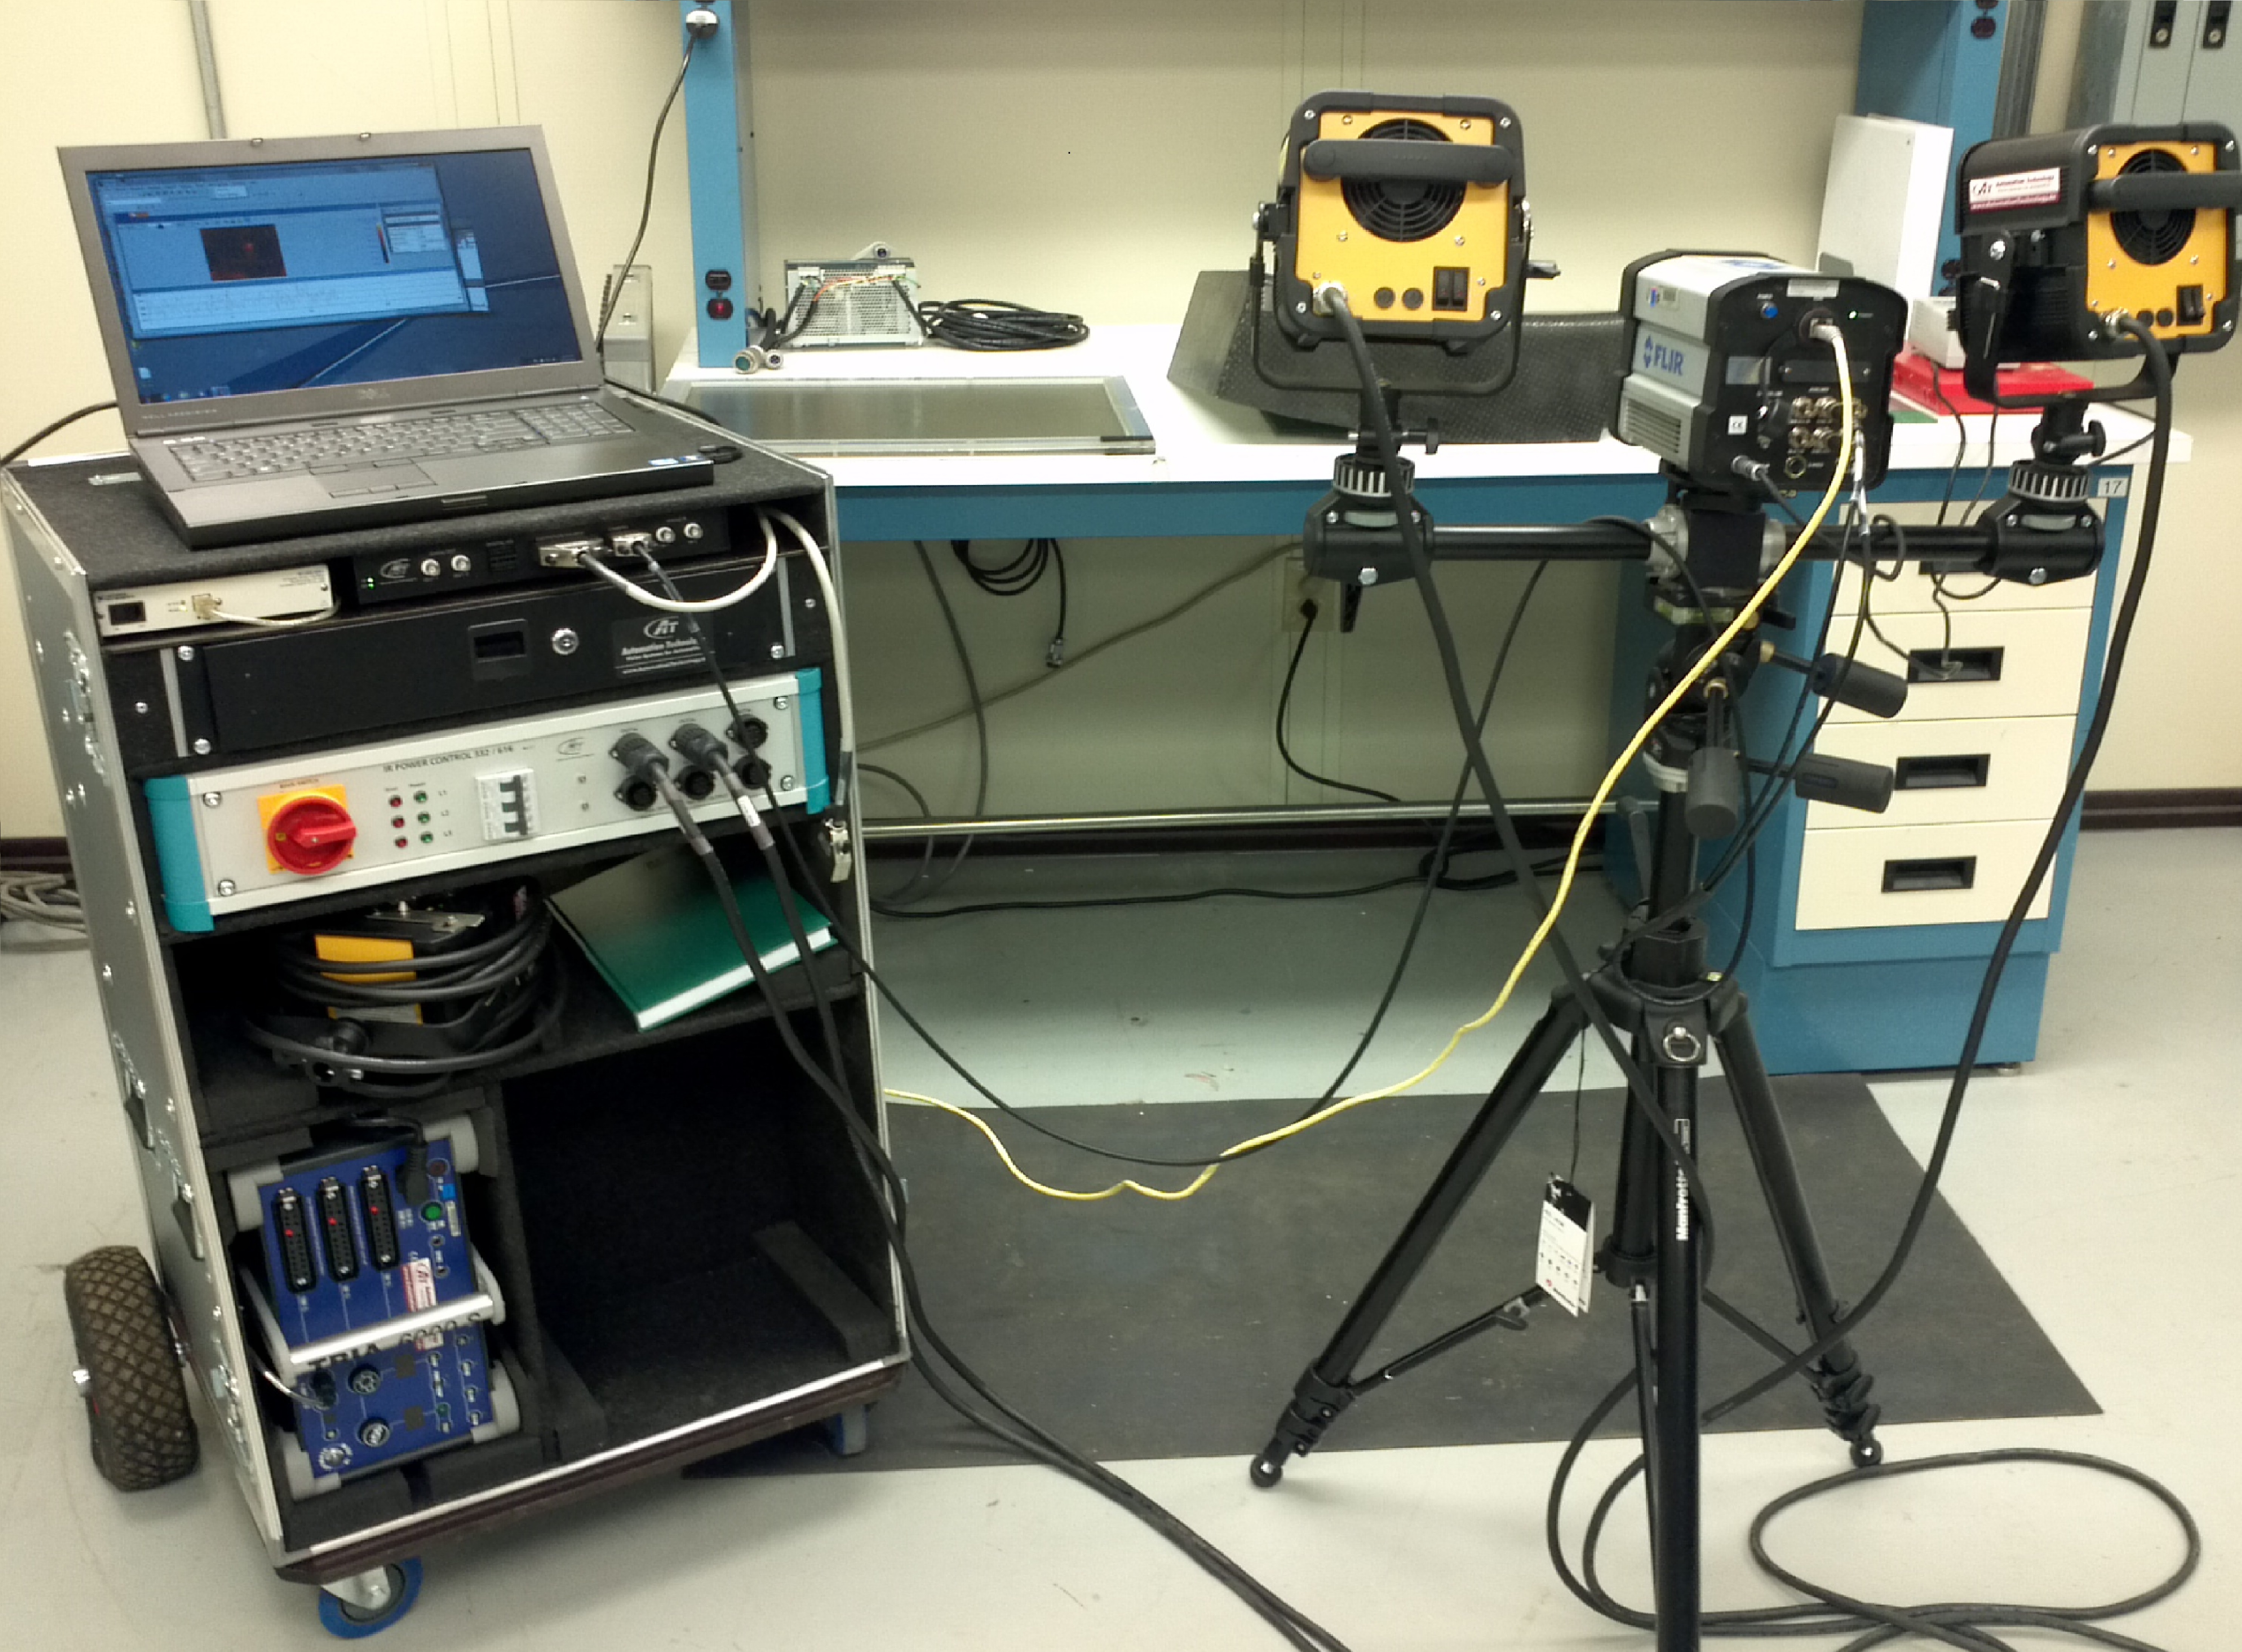 Shown: A Non-Destructive Evaluation Flash Thermography hardware set-up utilizing our advanced software tools.